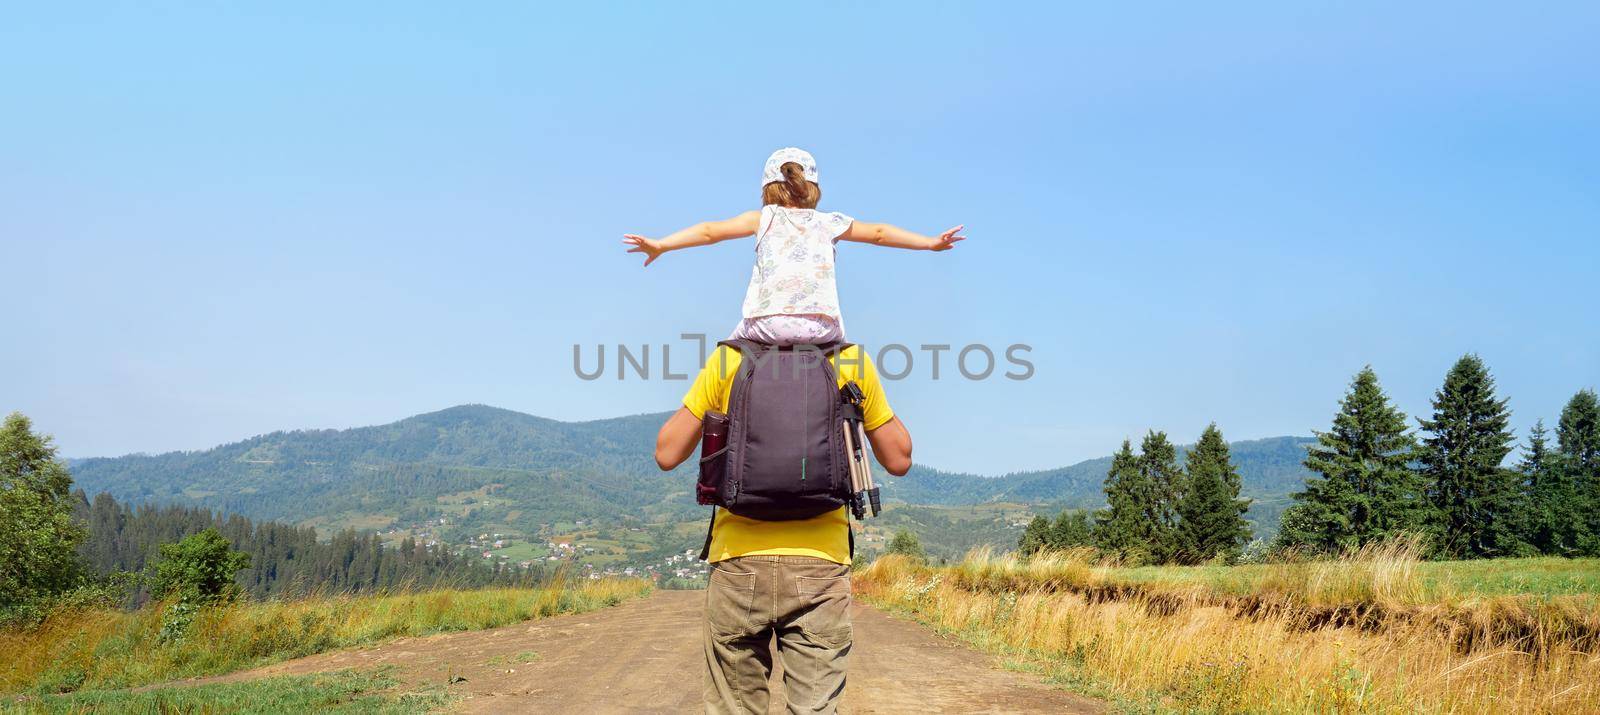 Freedom mountain children hiking trail walking hills. Piggyback ride father child travel mountain kids freedom child on shoulders dad and daughter father walking hiking trip nature kid arms spread out